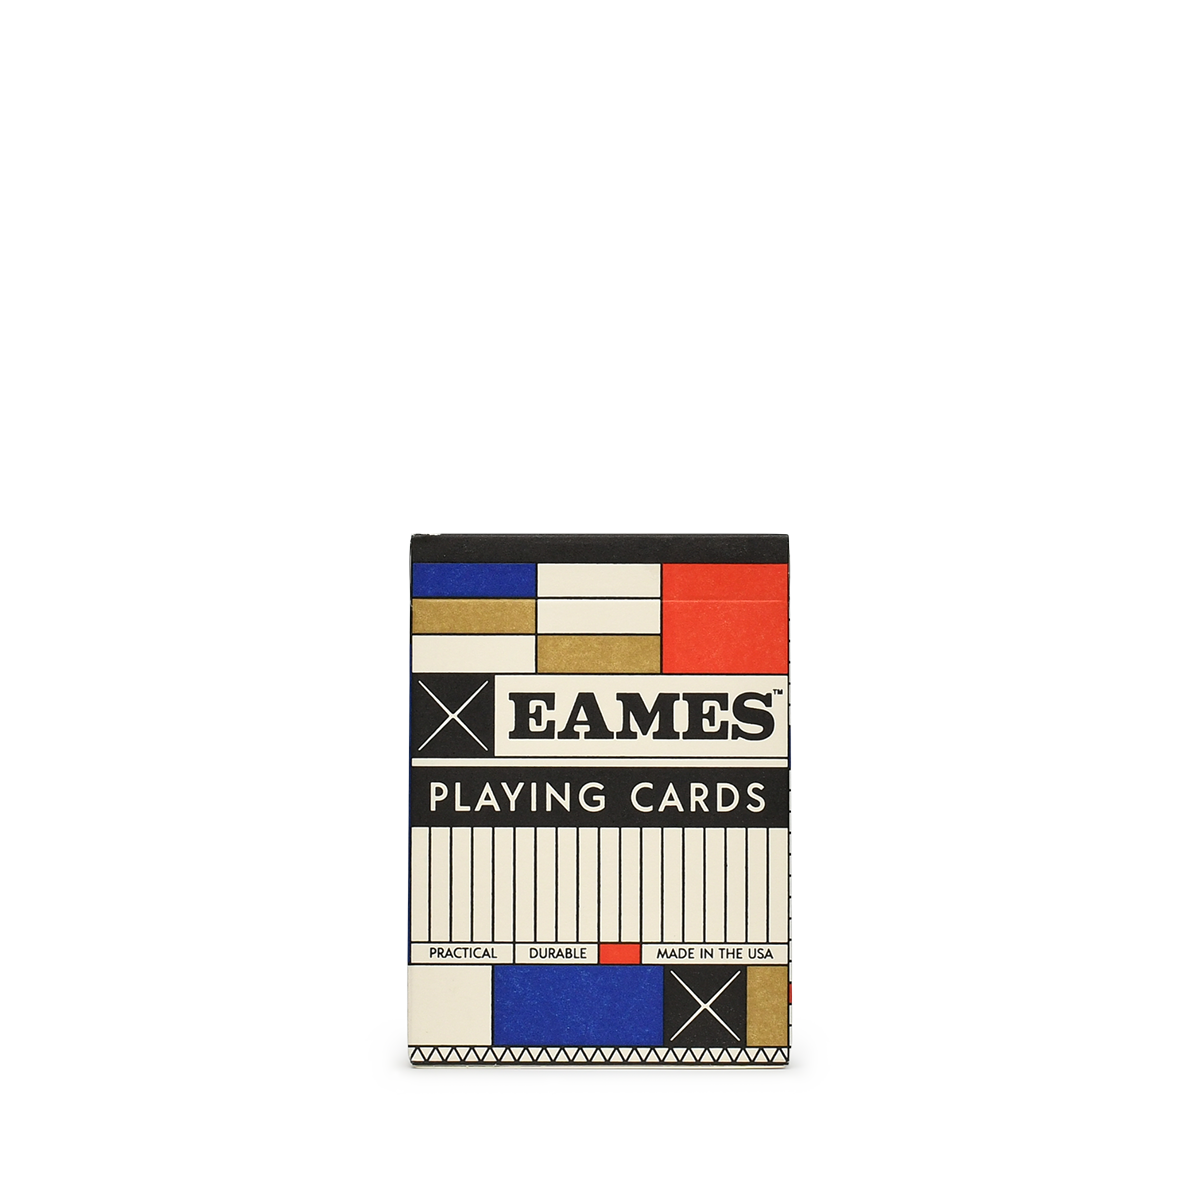 ART OF PLAY - PLAYING CARDS - EAMES DECK - BLUE